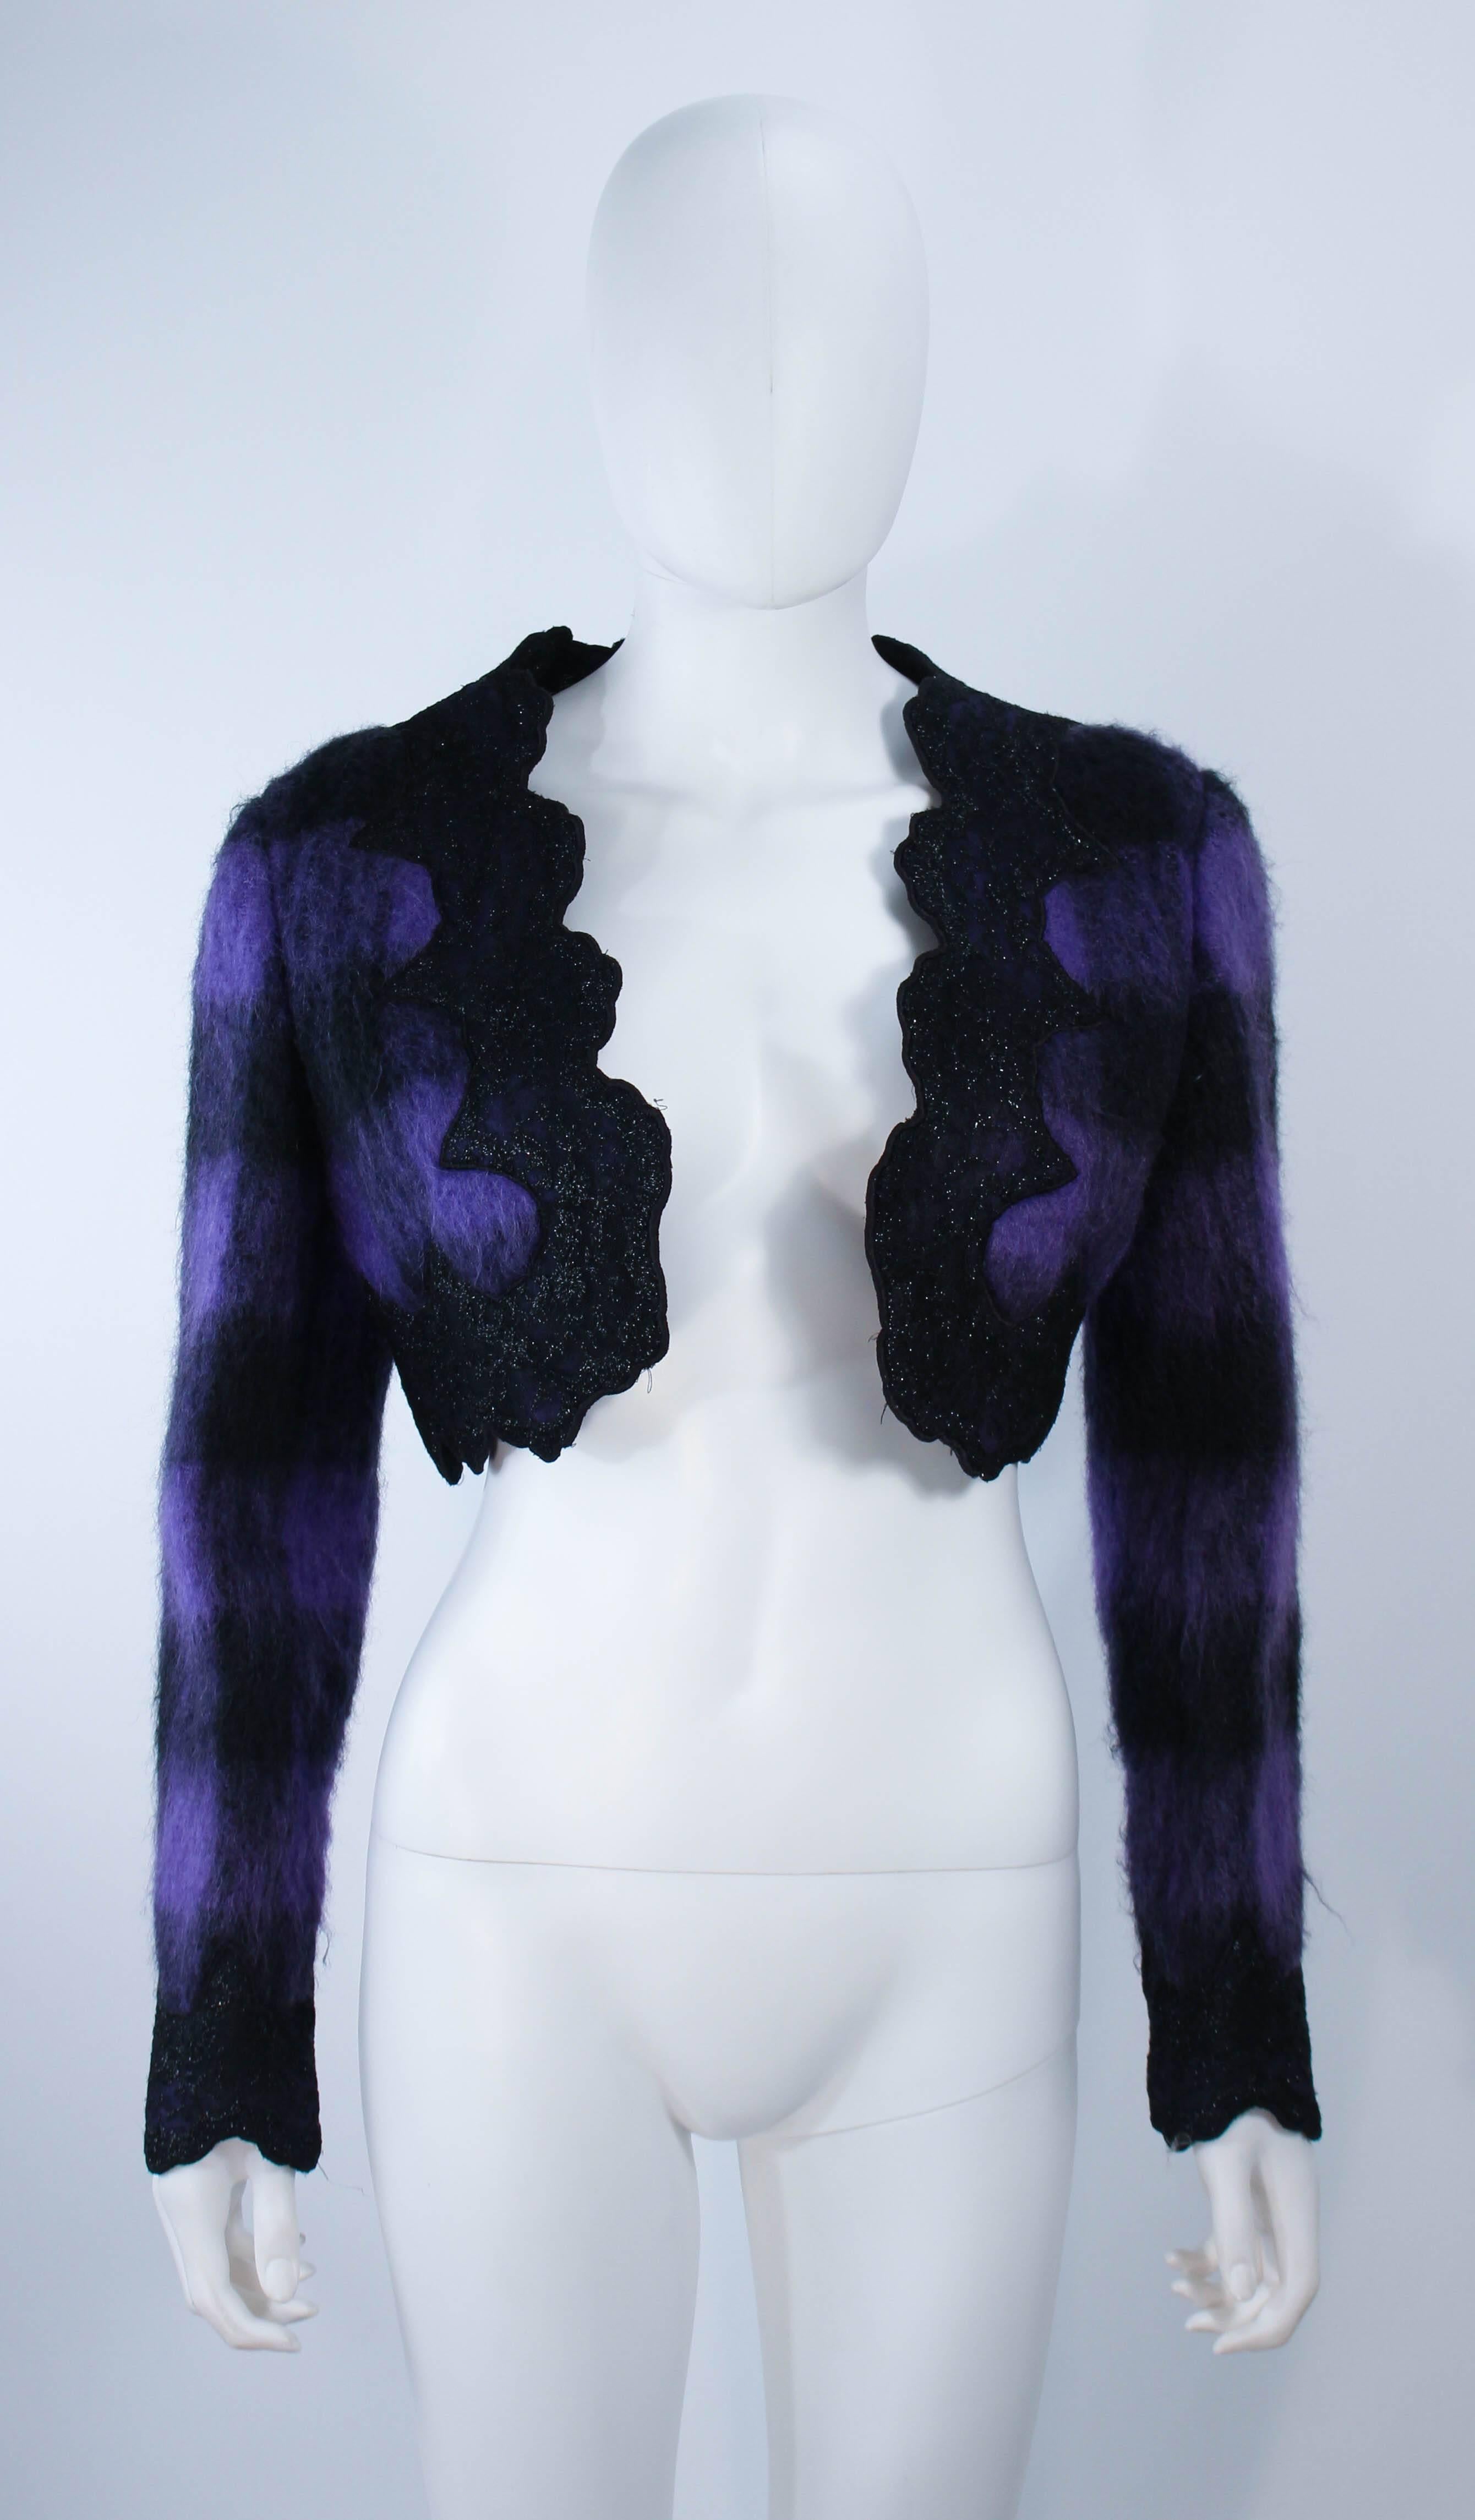 This Mr. Beene jacket is composed of a purple plaid patterned mohair with black lace metallic trim. Features an open bolero style. In excellent vintage condition.

**Please cross-reference measurements for personal accuracy. Size in description box